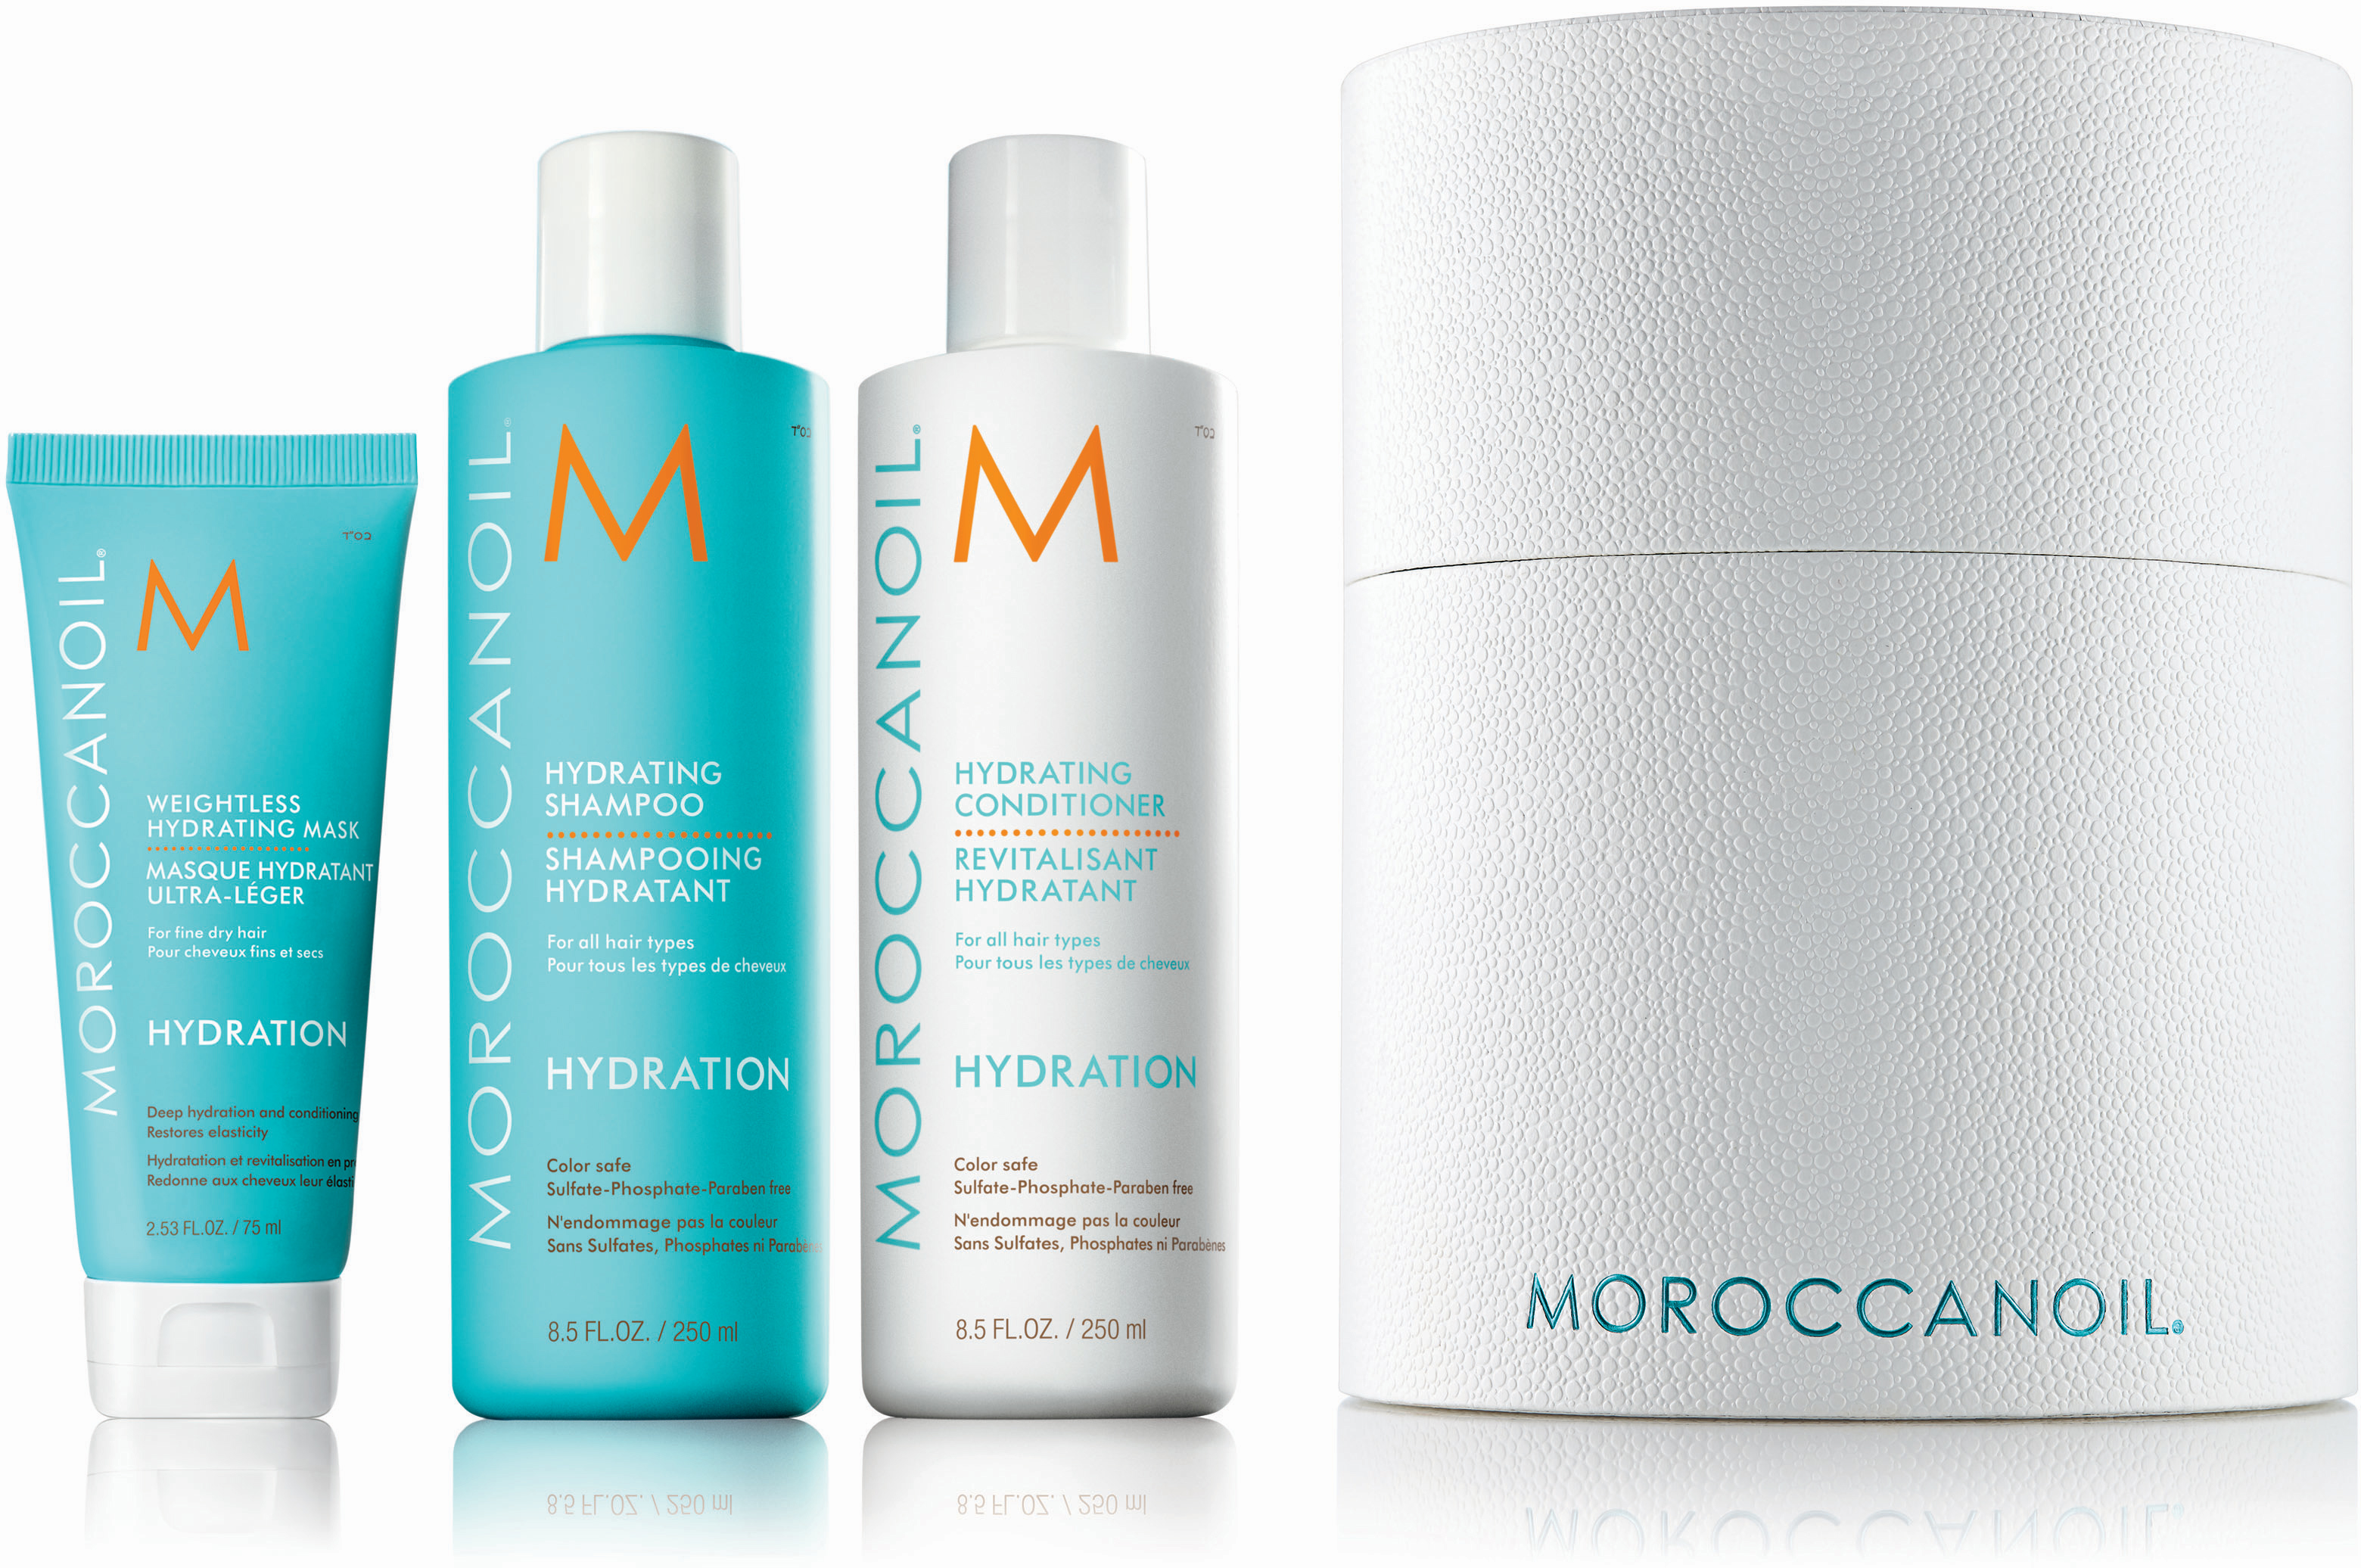 Moroccanoil Cylinder Hydrate